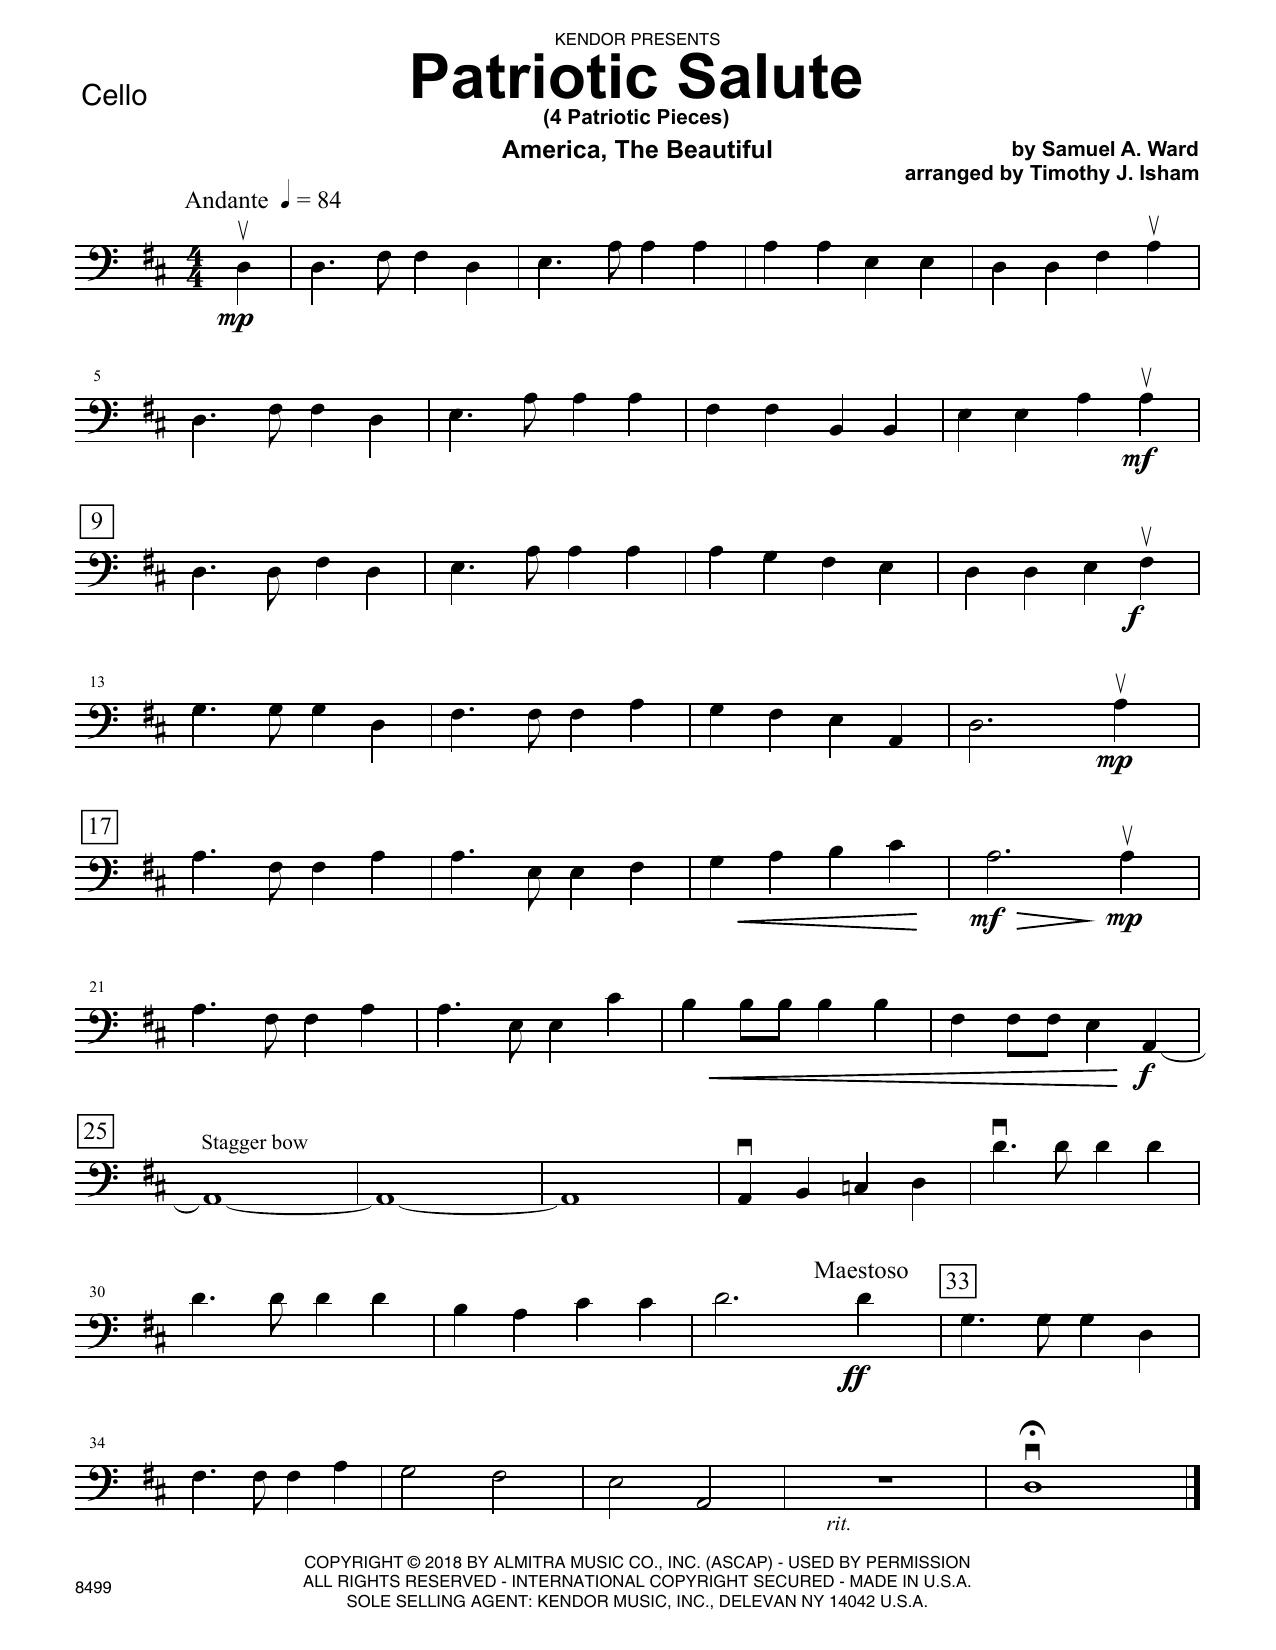 Timothy Isham Patriotic Salute (4 Patriotic Pieces) - Cello sheet music preview music notes and score for Orchestra including 4 page(s)